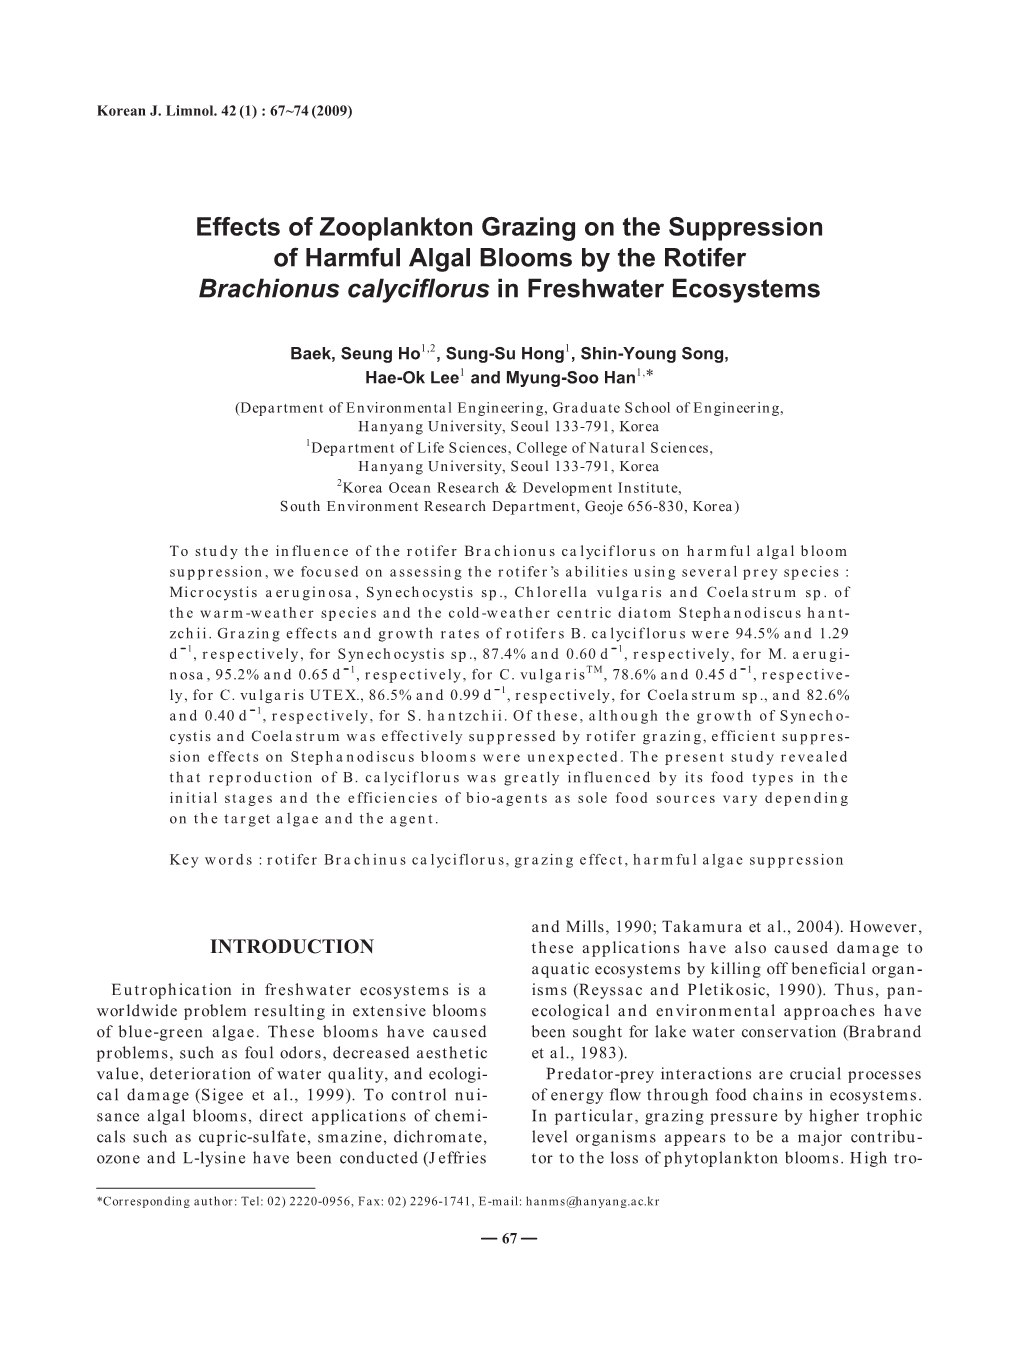 Effects of Zooplankton Grazing on the Suppression of Harmful Algal Blooms by the Rotifer Brachionus Calyciflorus in Freshwater Ecosystems